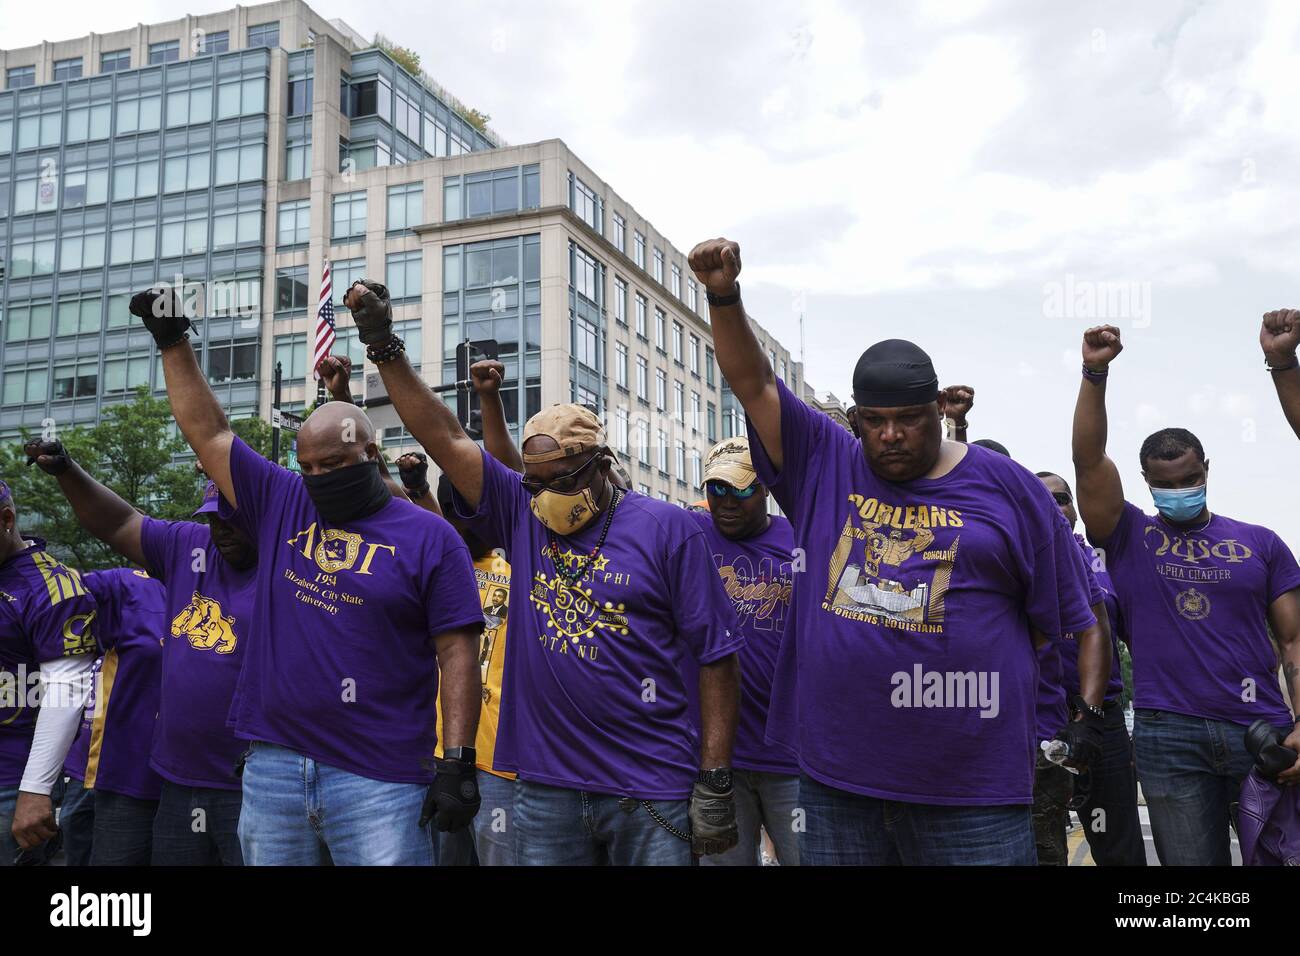 268 Omega Psi Phi Images Stock Photos  Vectors  Shutterstock